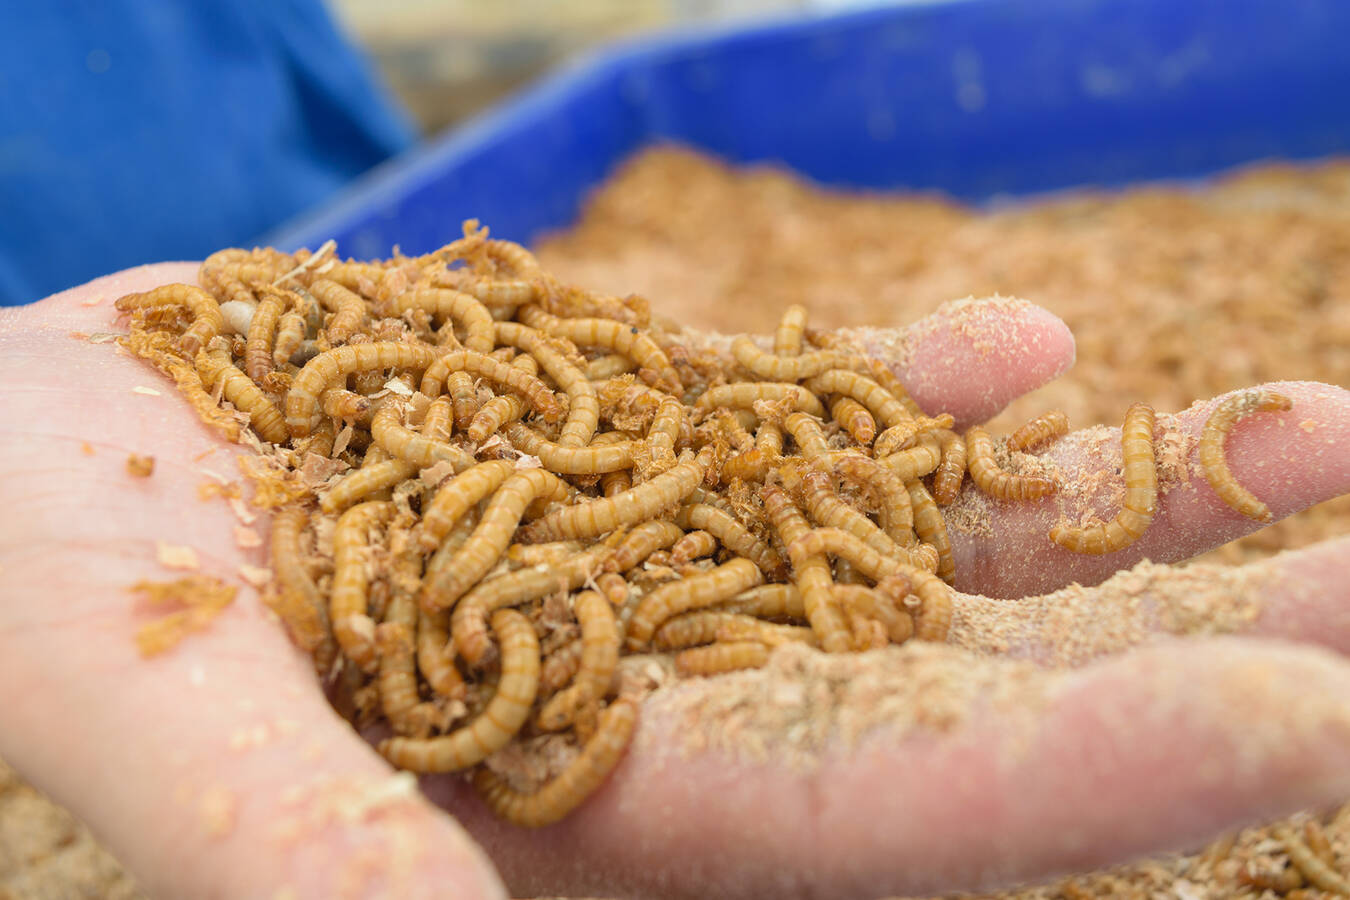 RHEWUM joins the Food Revolution In cooperation with biologists, RHEWUM has developed a new screening machine for sorting mealworms. Screening mealworms poses unique technical challenges with regard to animal health and safety.